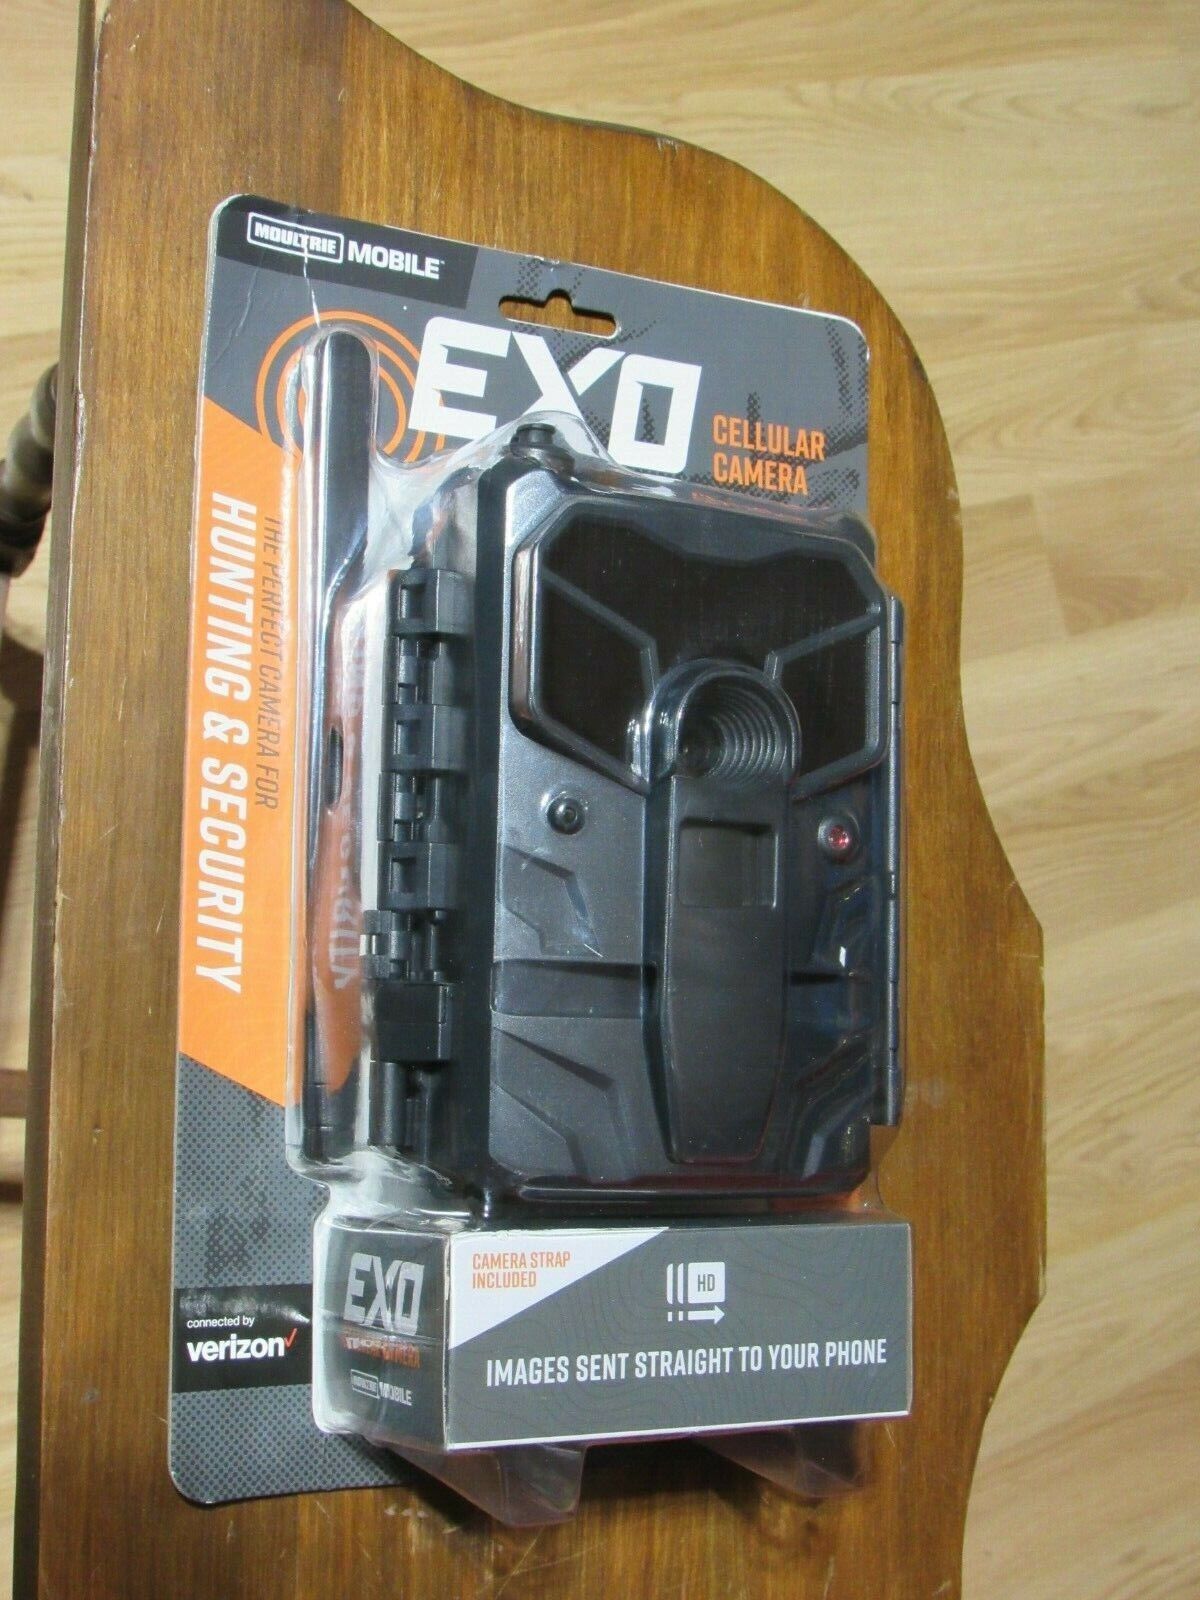 Moultrie Mobile EXO Cellular Trail Camera Powered MCG-14048 Brand New Sealed Box